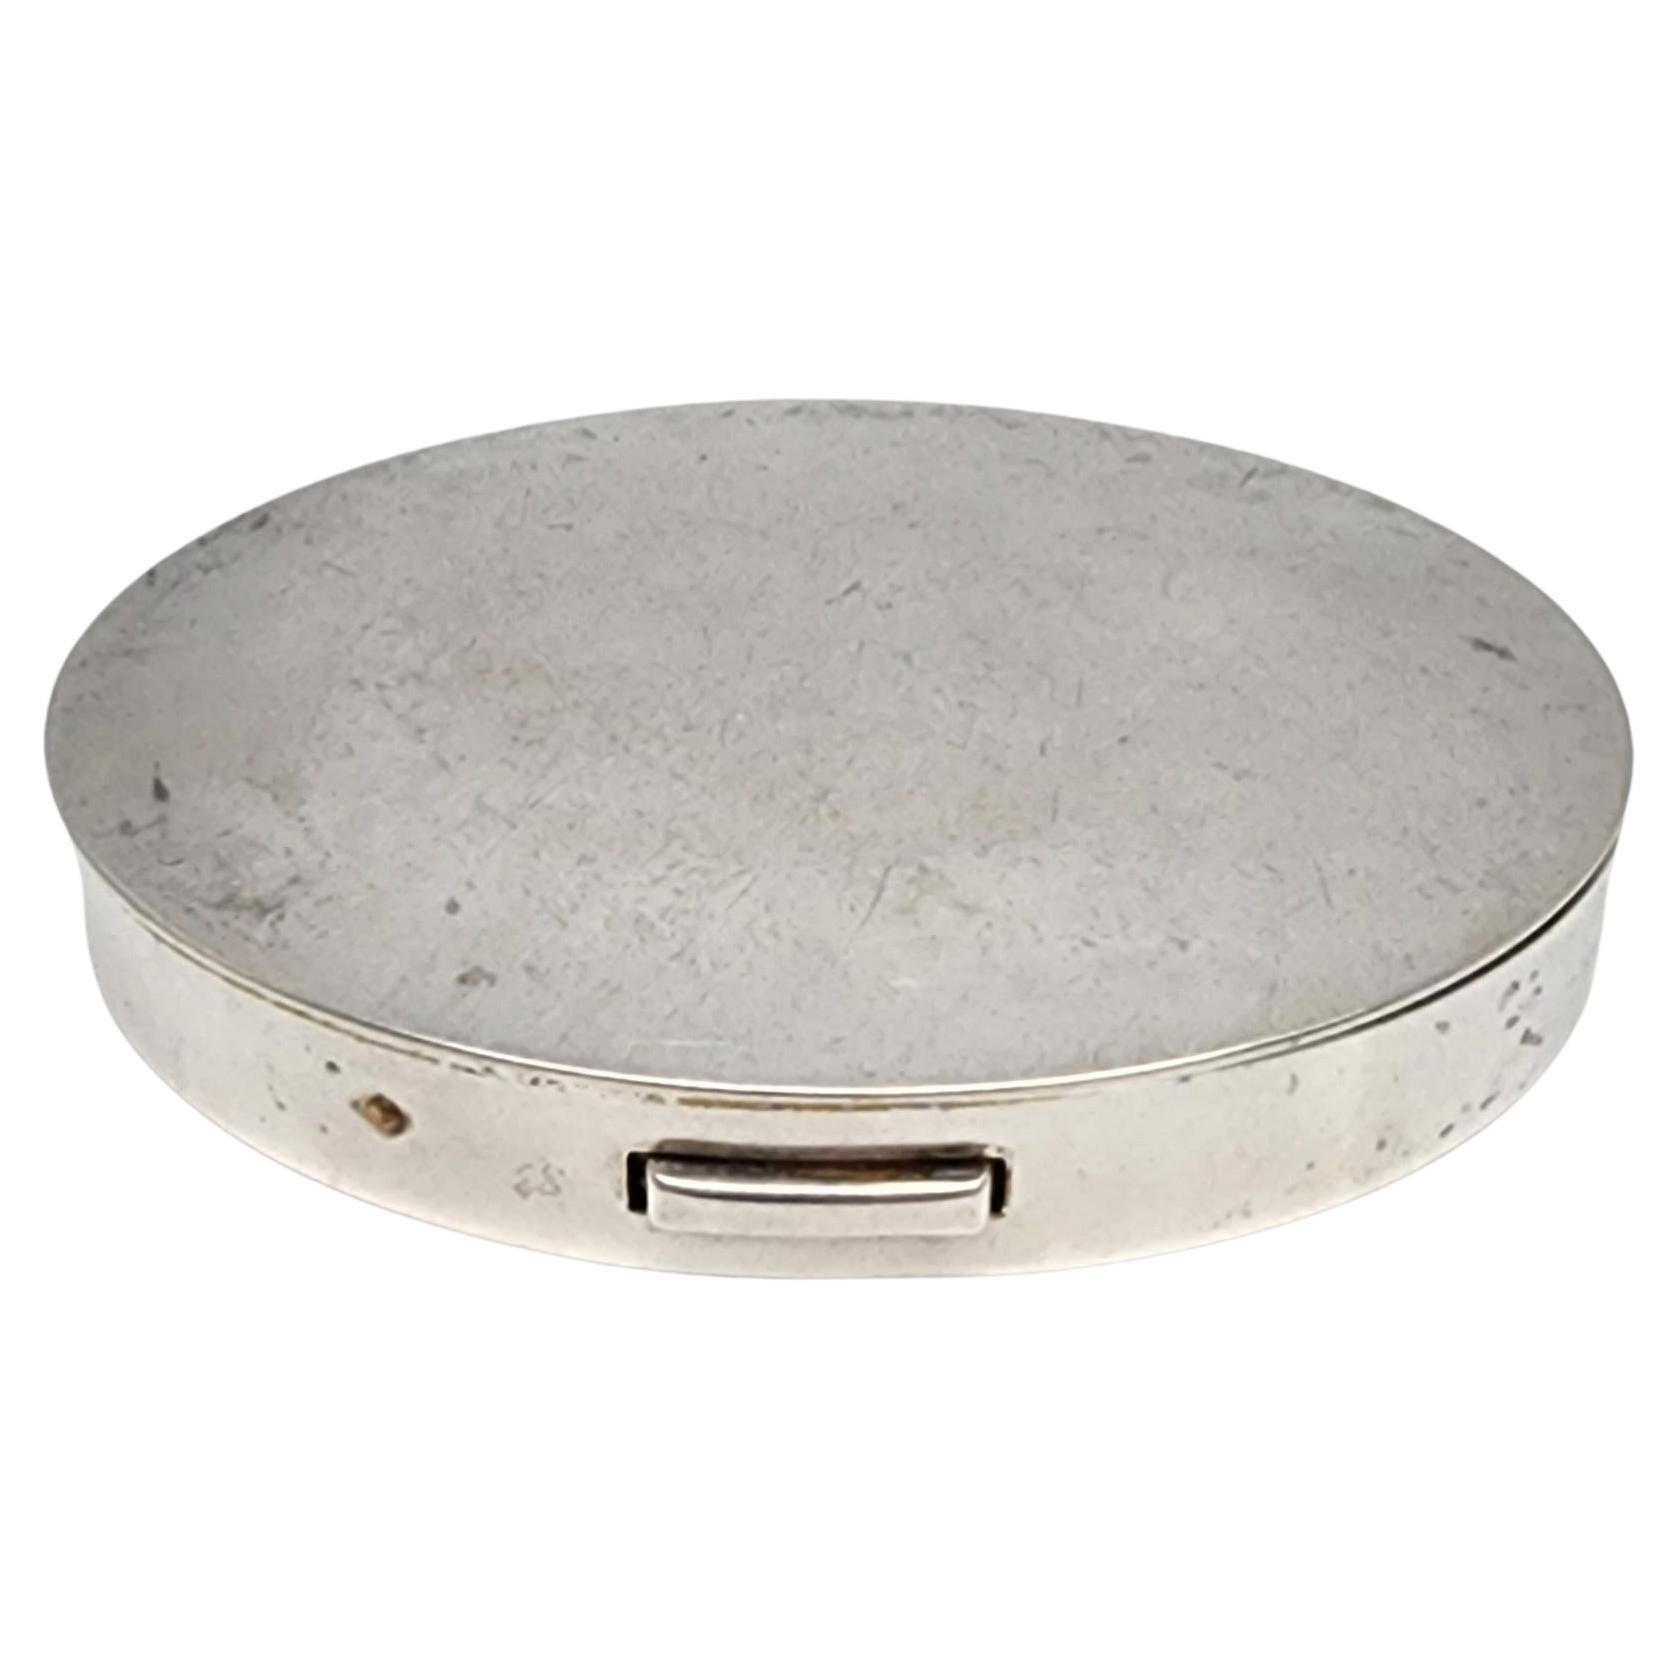 Dunhill Sterling Silver Oval Mirror Compact #16887 For Sale